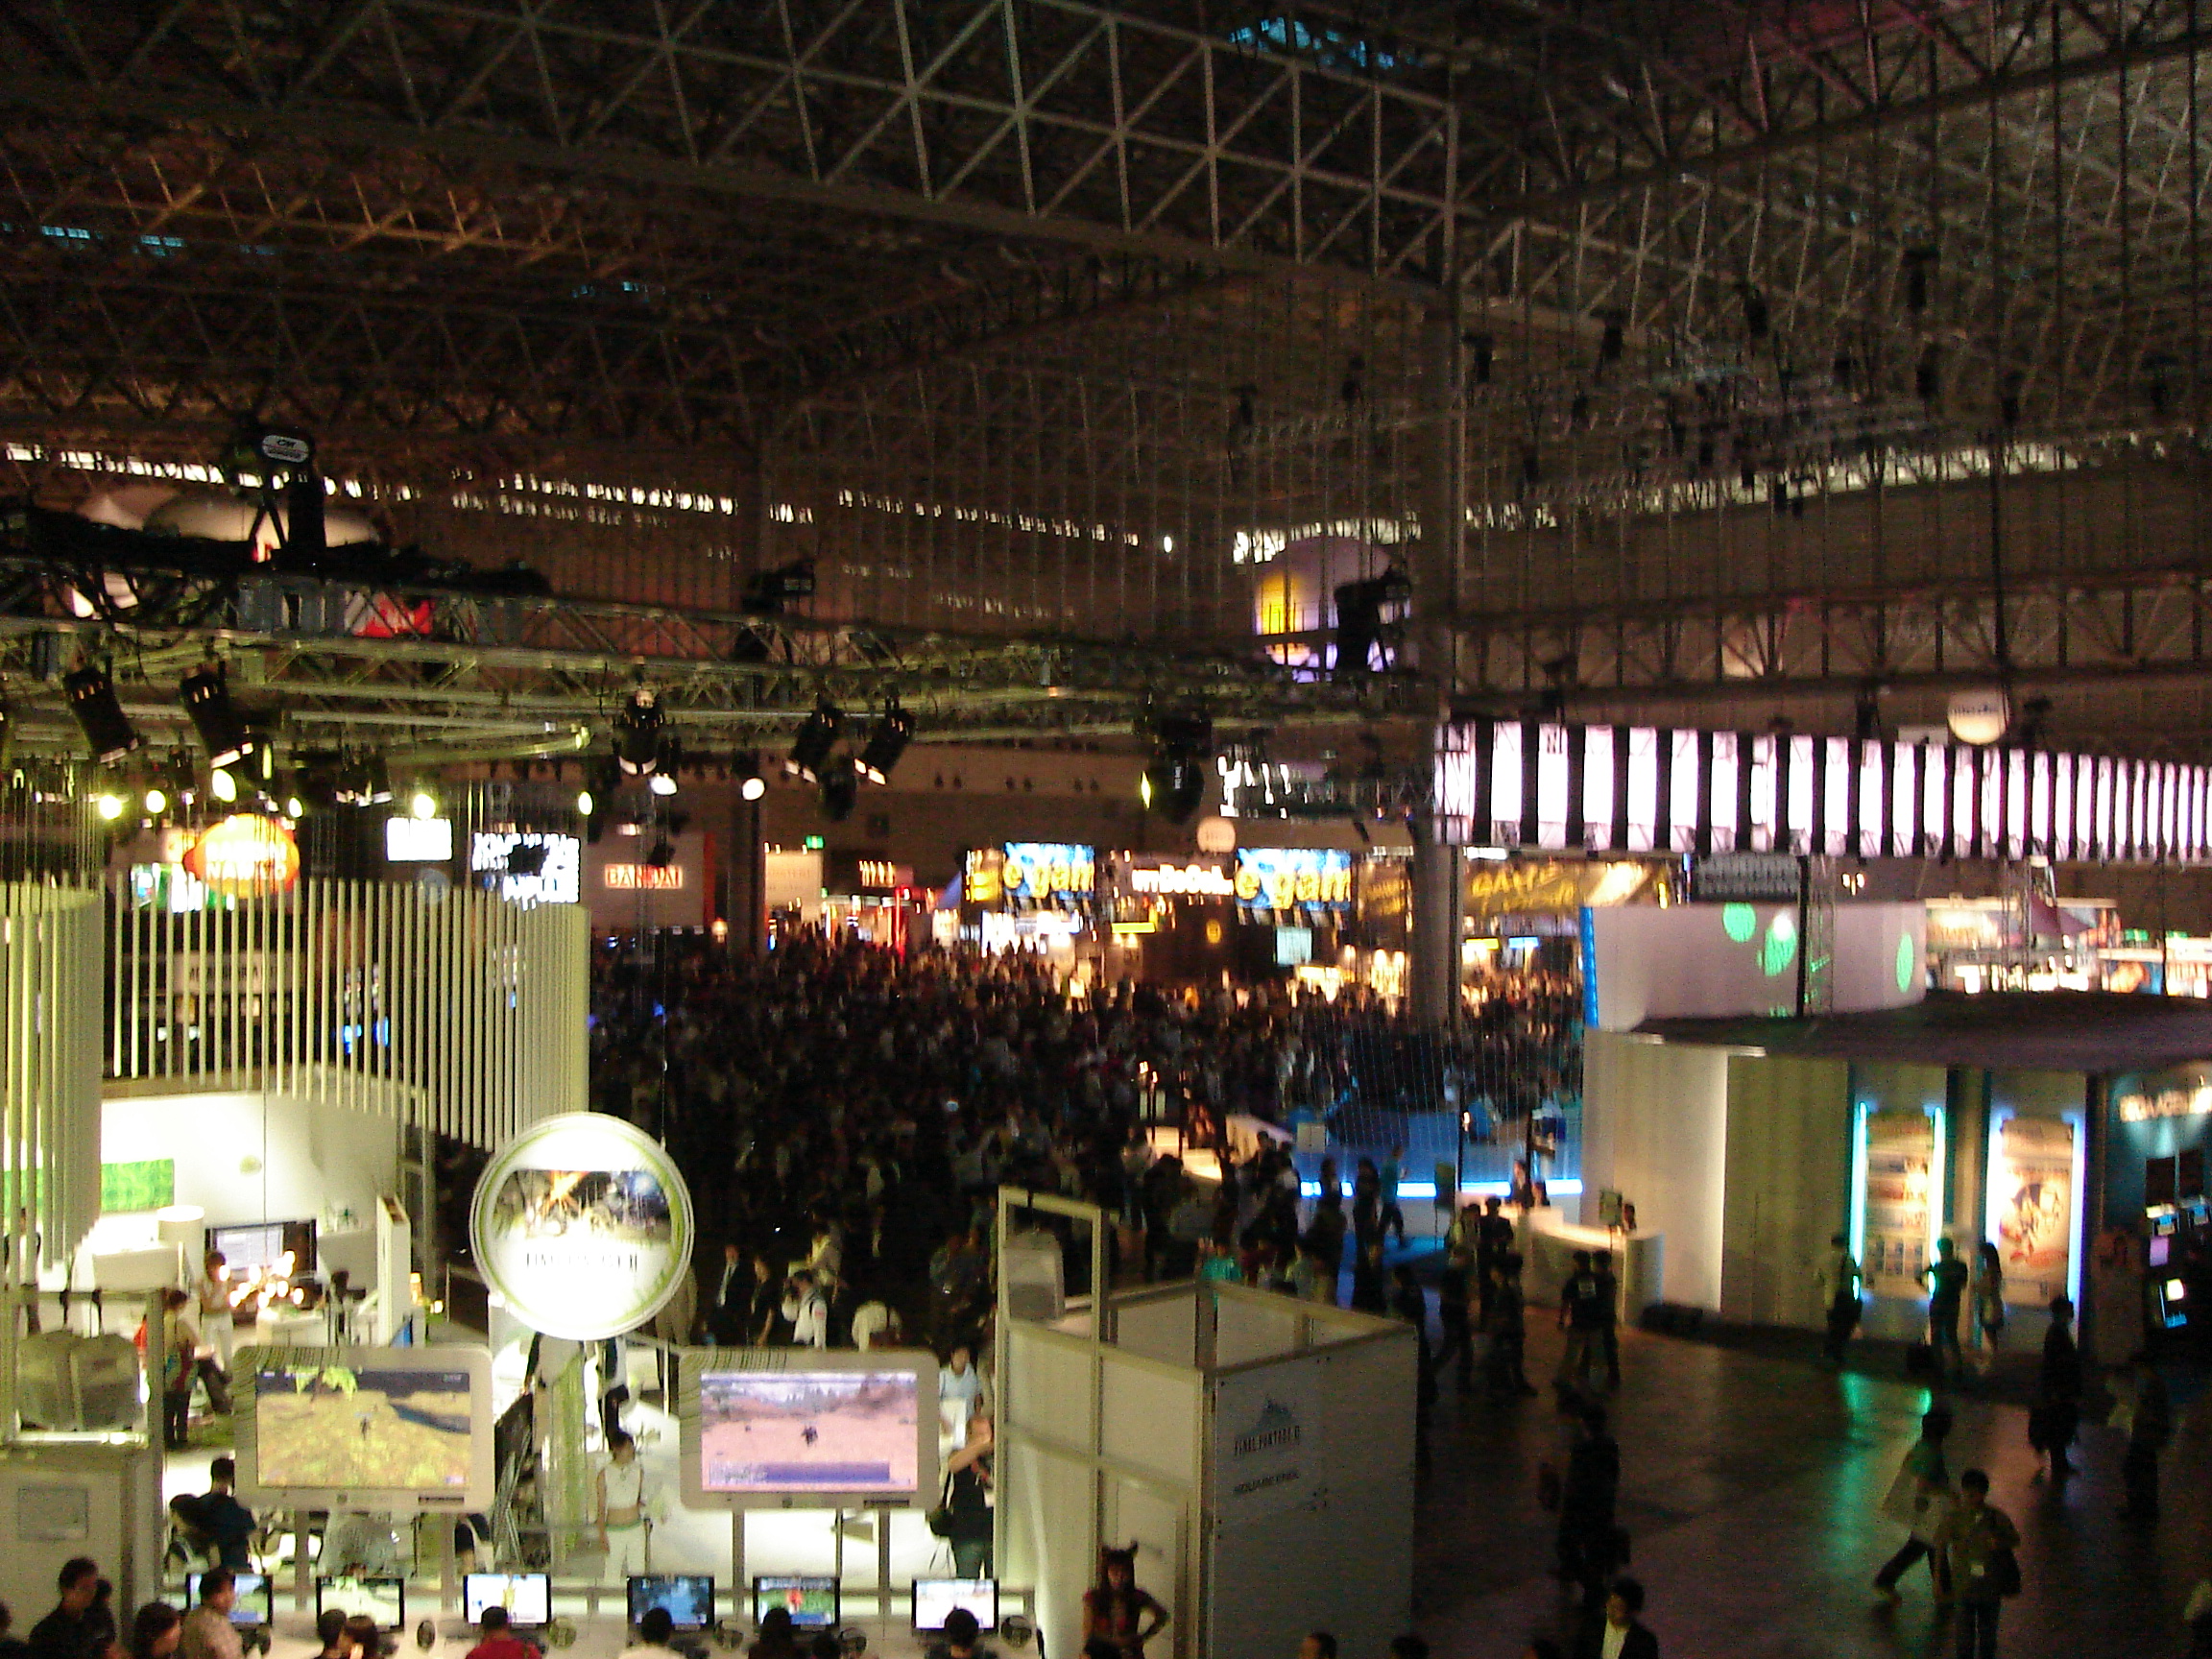 a view of the convention booths from a height